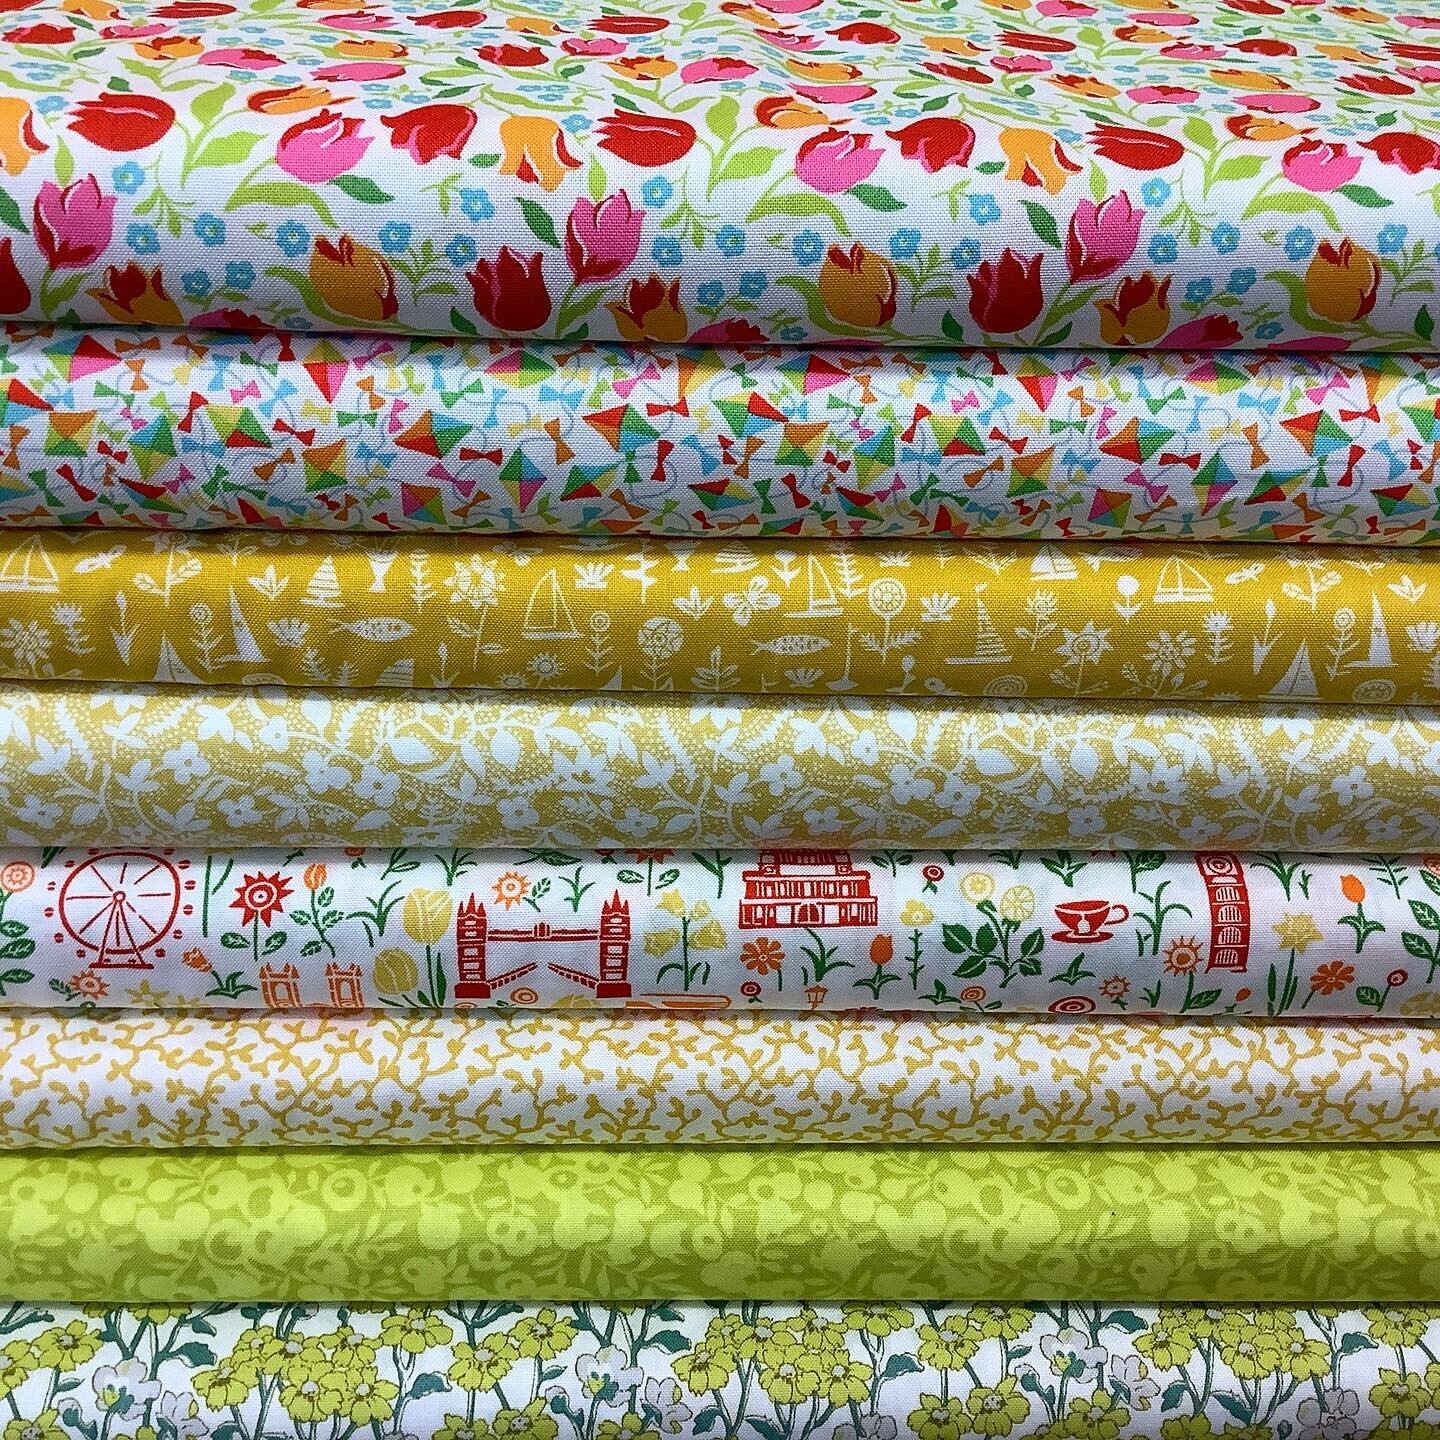 Love Liberty! There&rsquo;s still time to enter our draw to win Liberty goodies. Simply buy at least 4 @libertyquilting FQs or 1m of fabric and we&rsquo;ll enter your name. It&rsquo;s that simple!

This draw is open to both online and instore custome